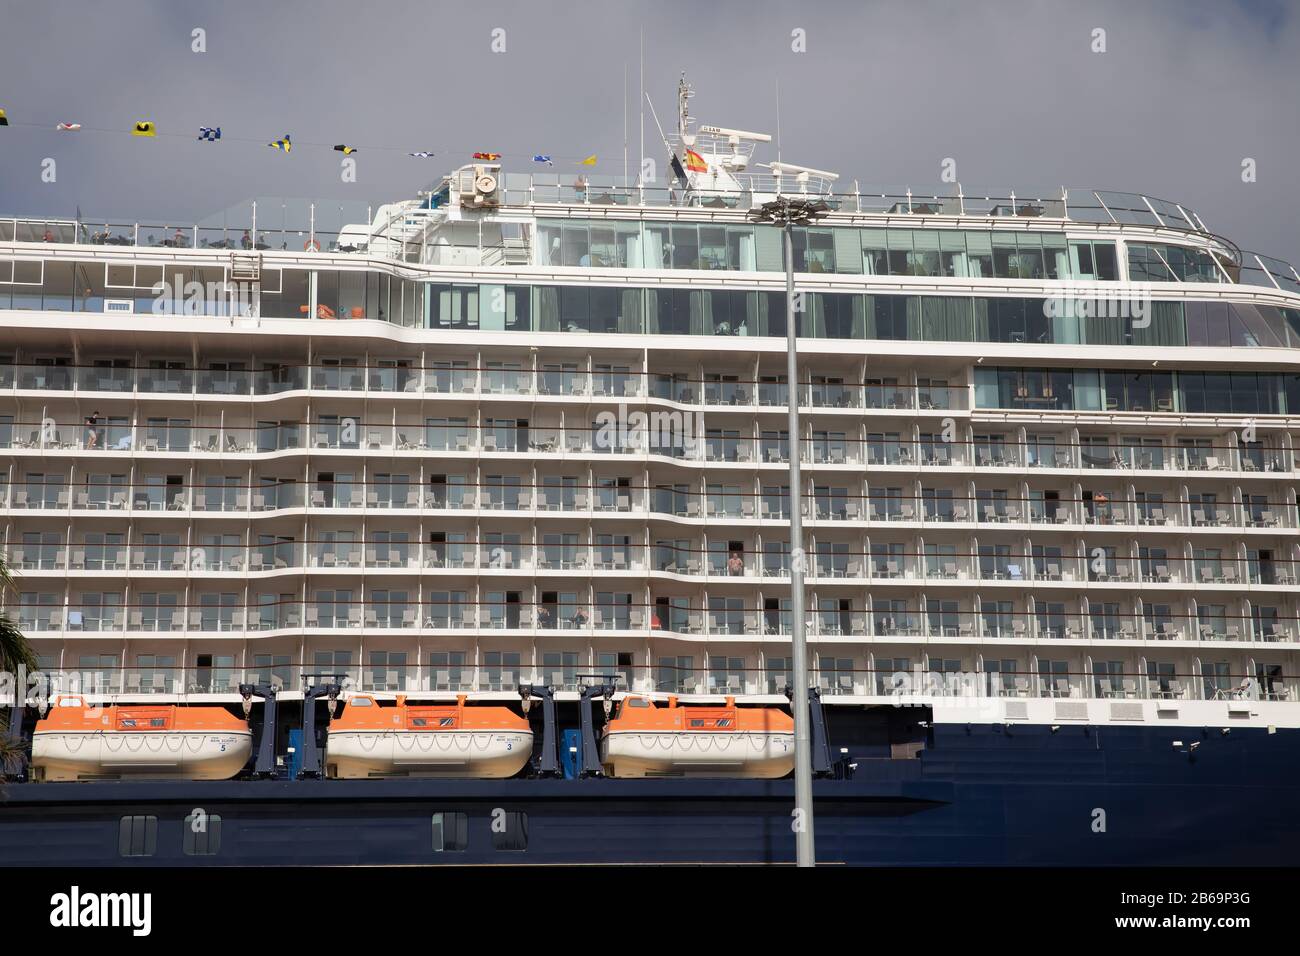 Mein Schiff 3 moored in Las Palmas, Gran Canaria, one of Spains Canary Islands off Northwestern Africa Stock Photo